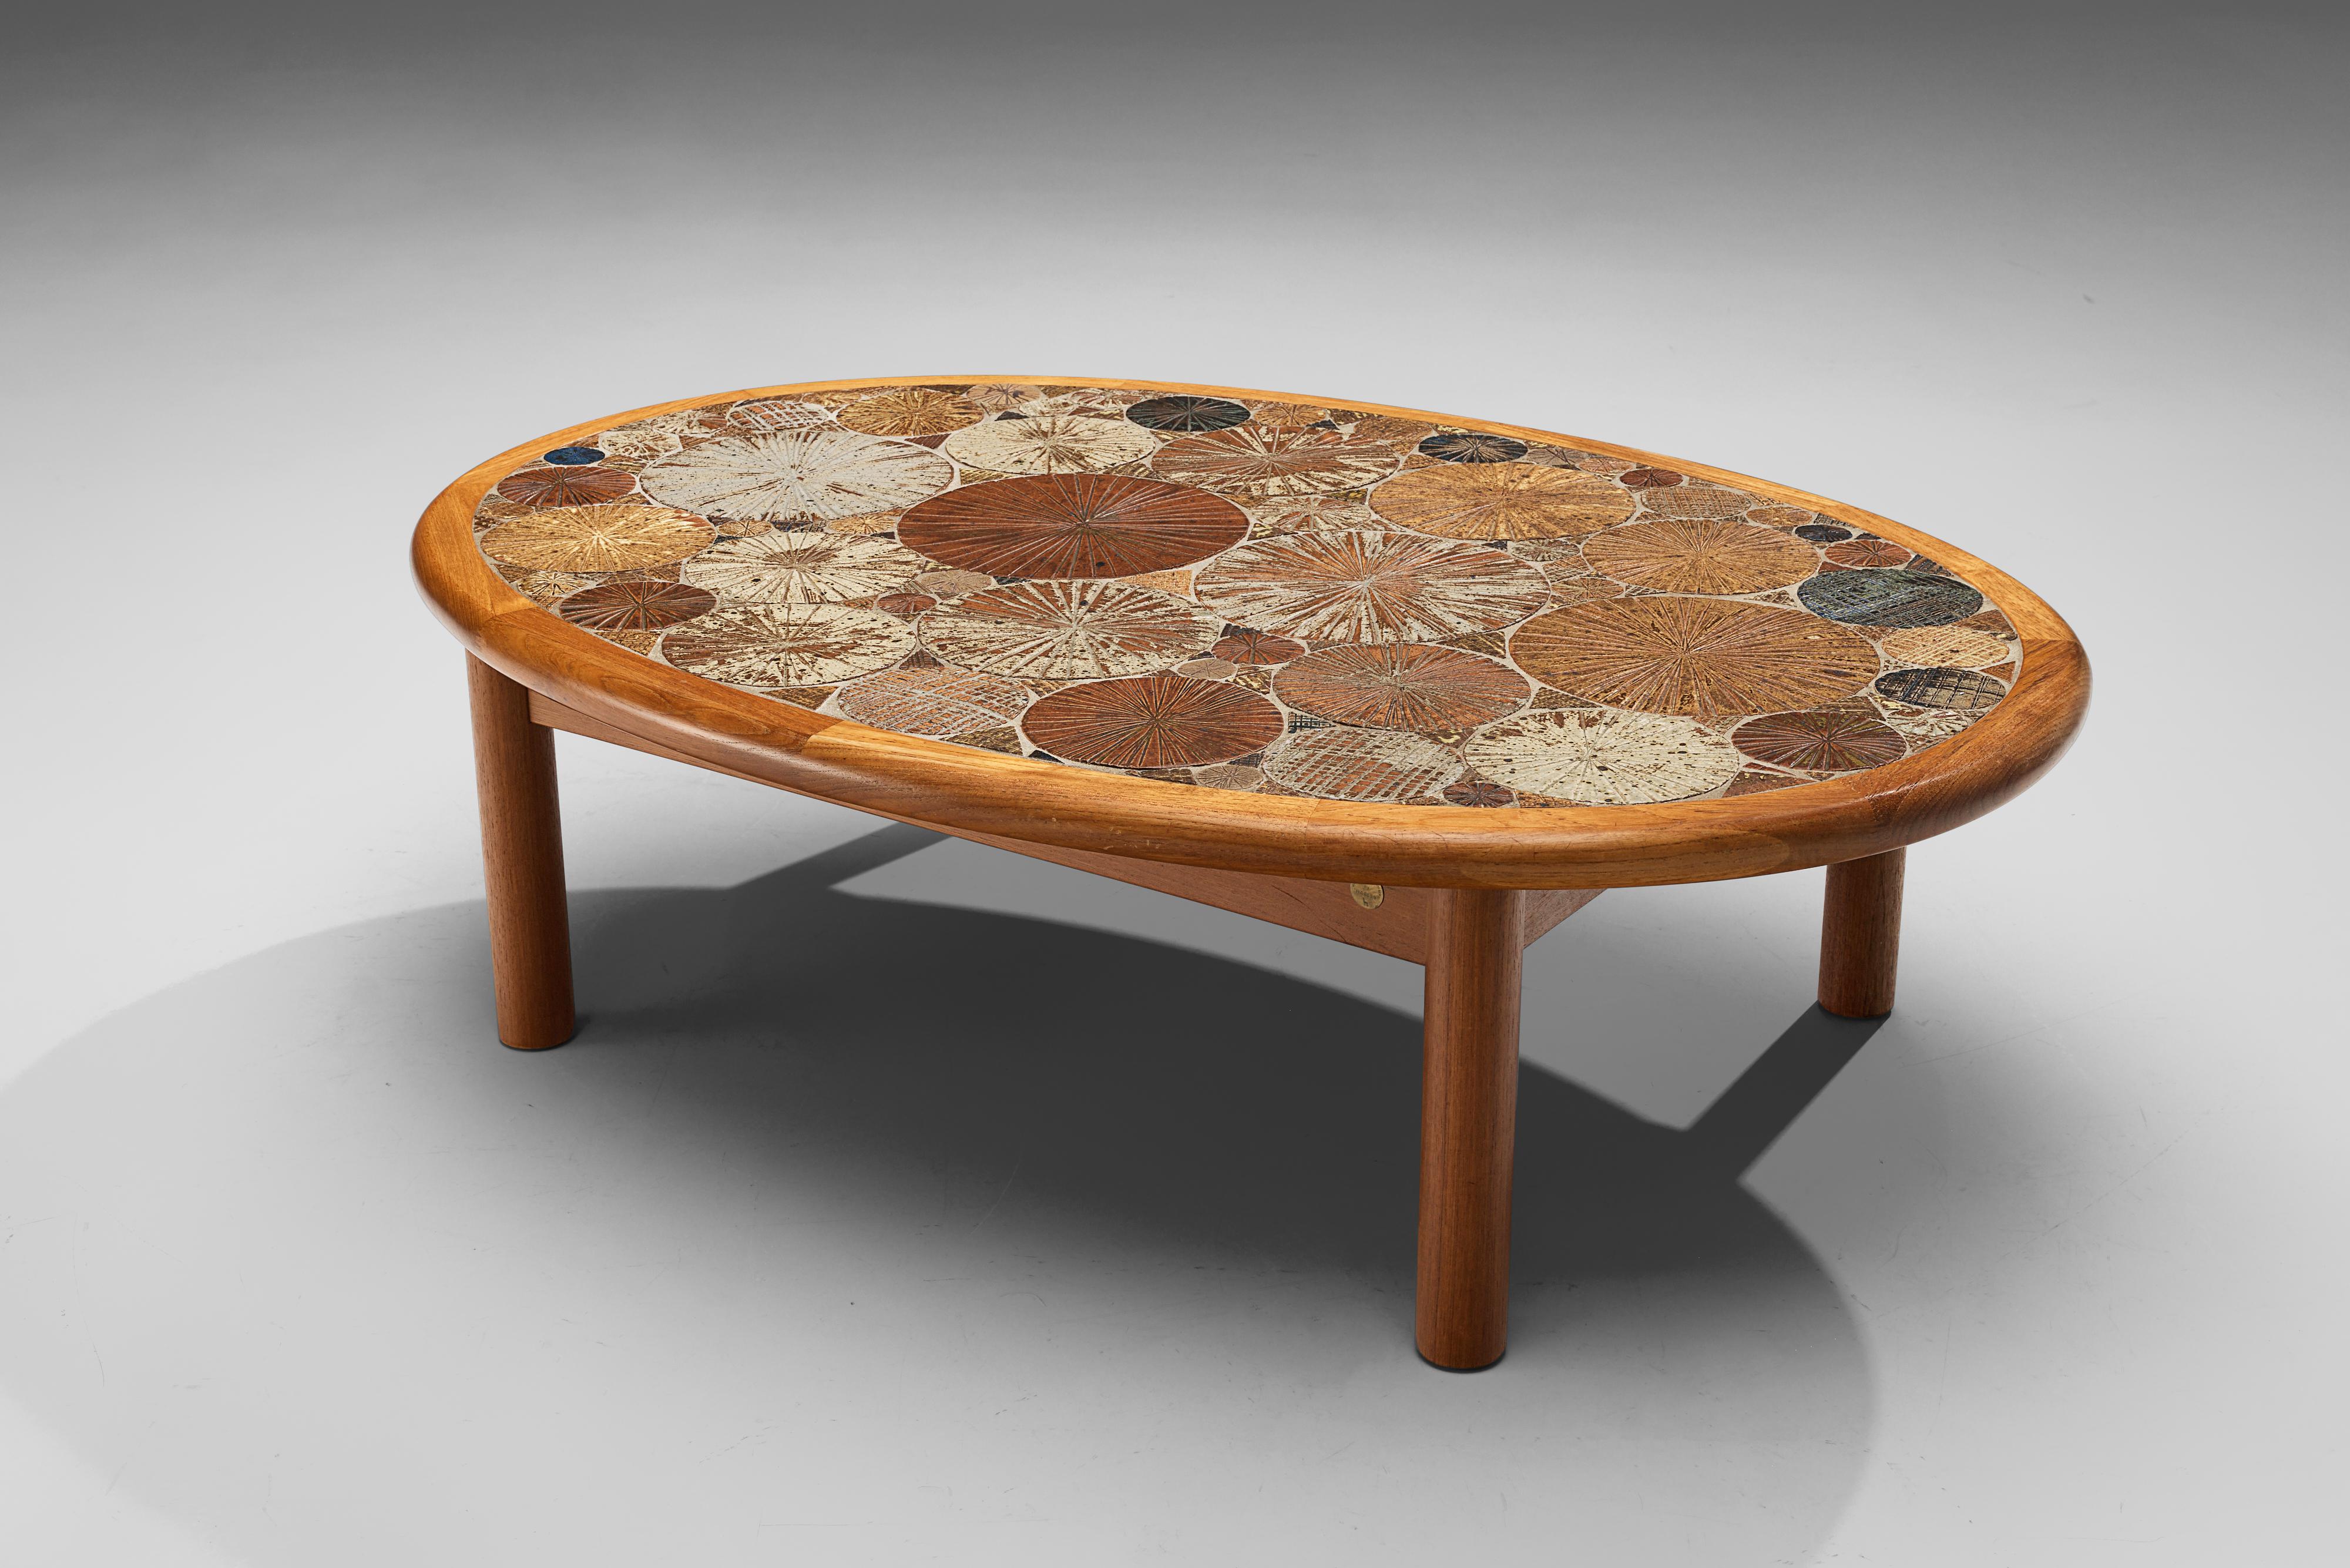 Tue Poulsen for Haslev Møbelsnedkeri, coffee table, ceramics, teak, Denmark, 1963.

This coffee table with a top with ceramic tile inlay is the ultimate symbioses between art and furniture. Multi-color tiles were handmade by Tue Poulsen. The